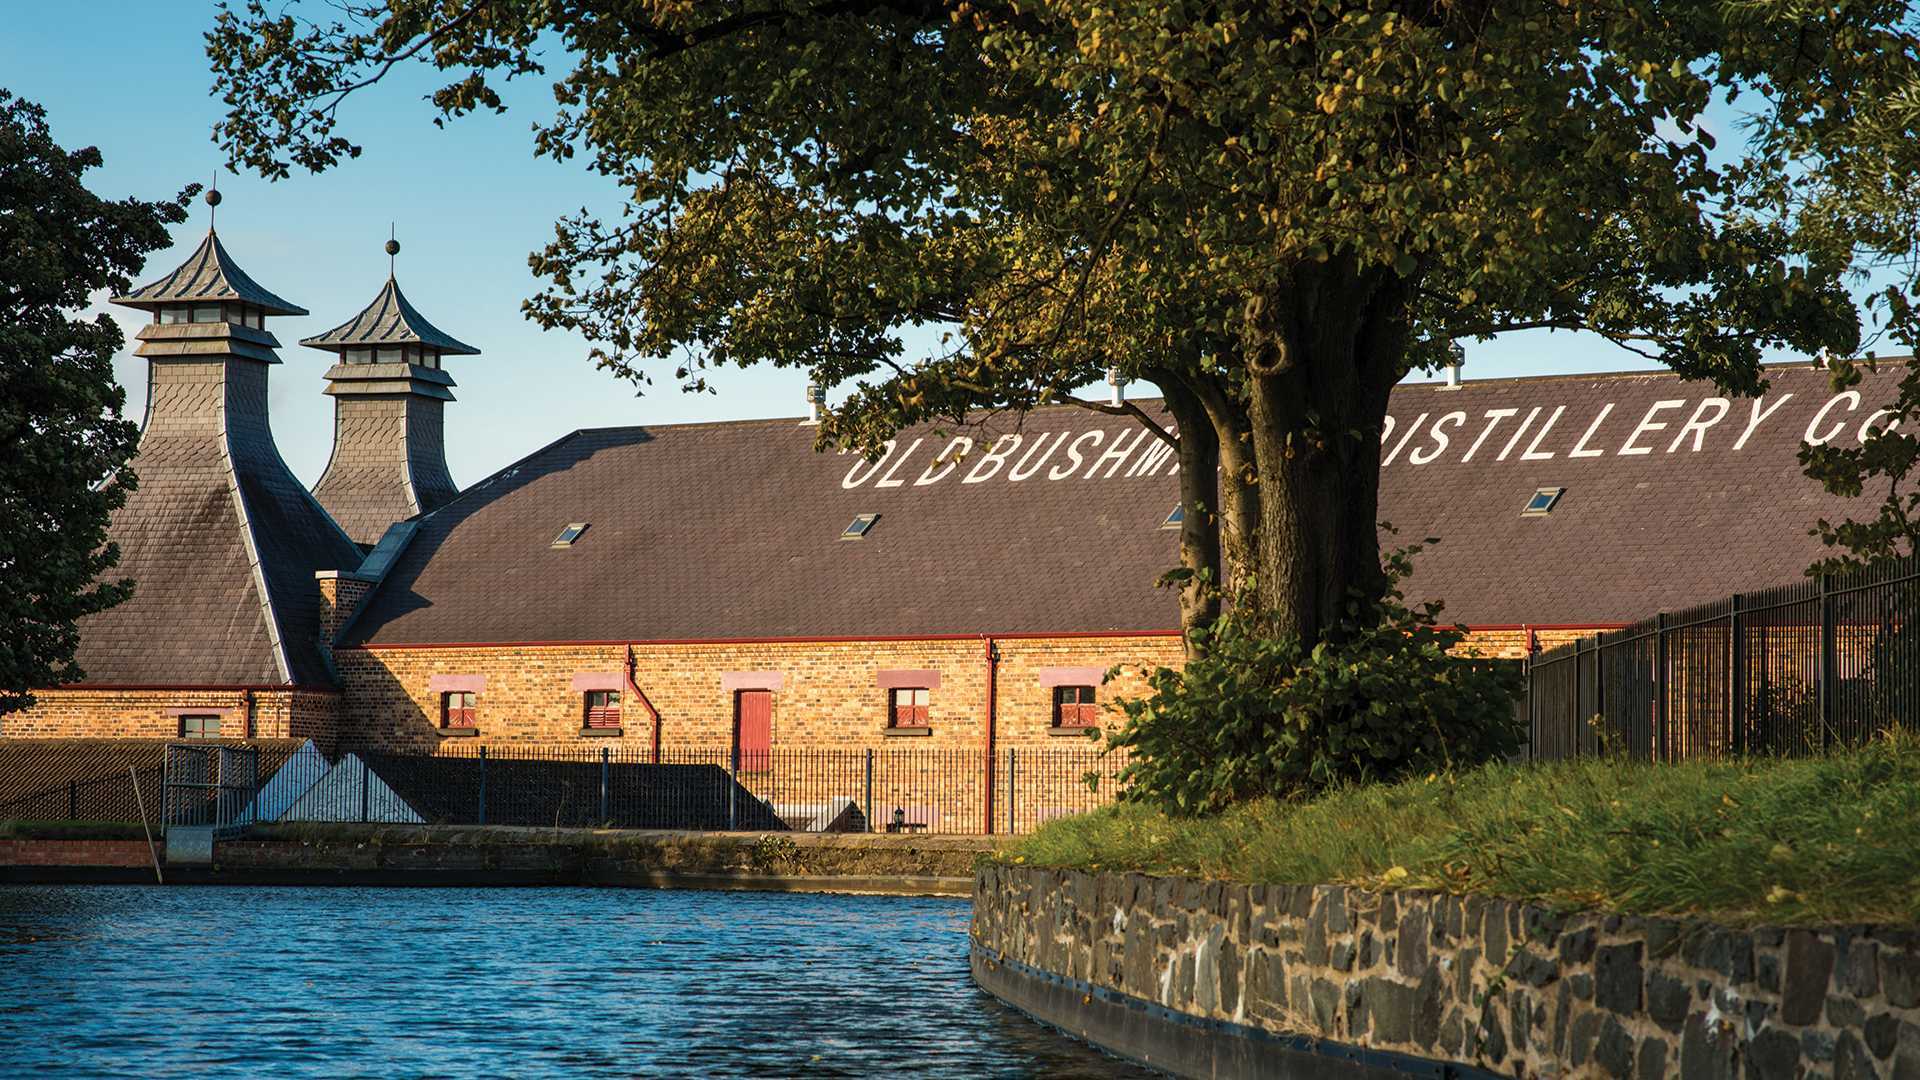 Irish whisky | Bushmills is the oldest distillery in the world